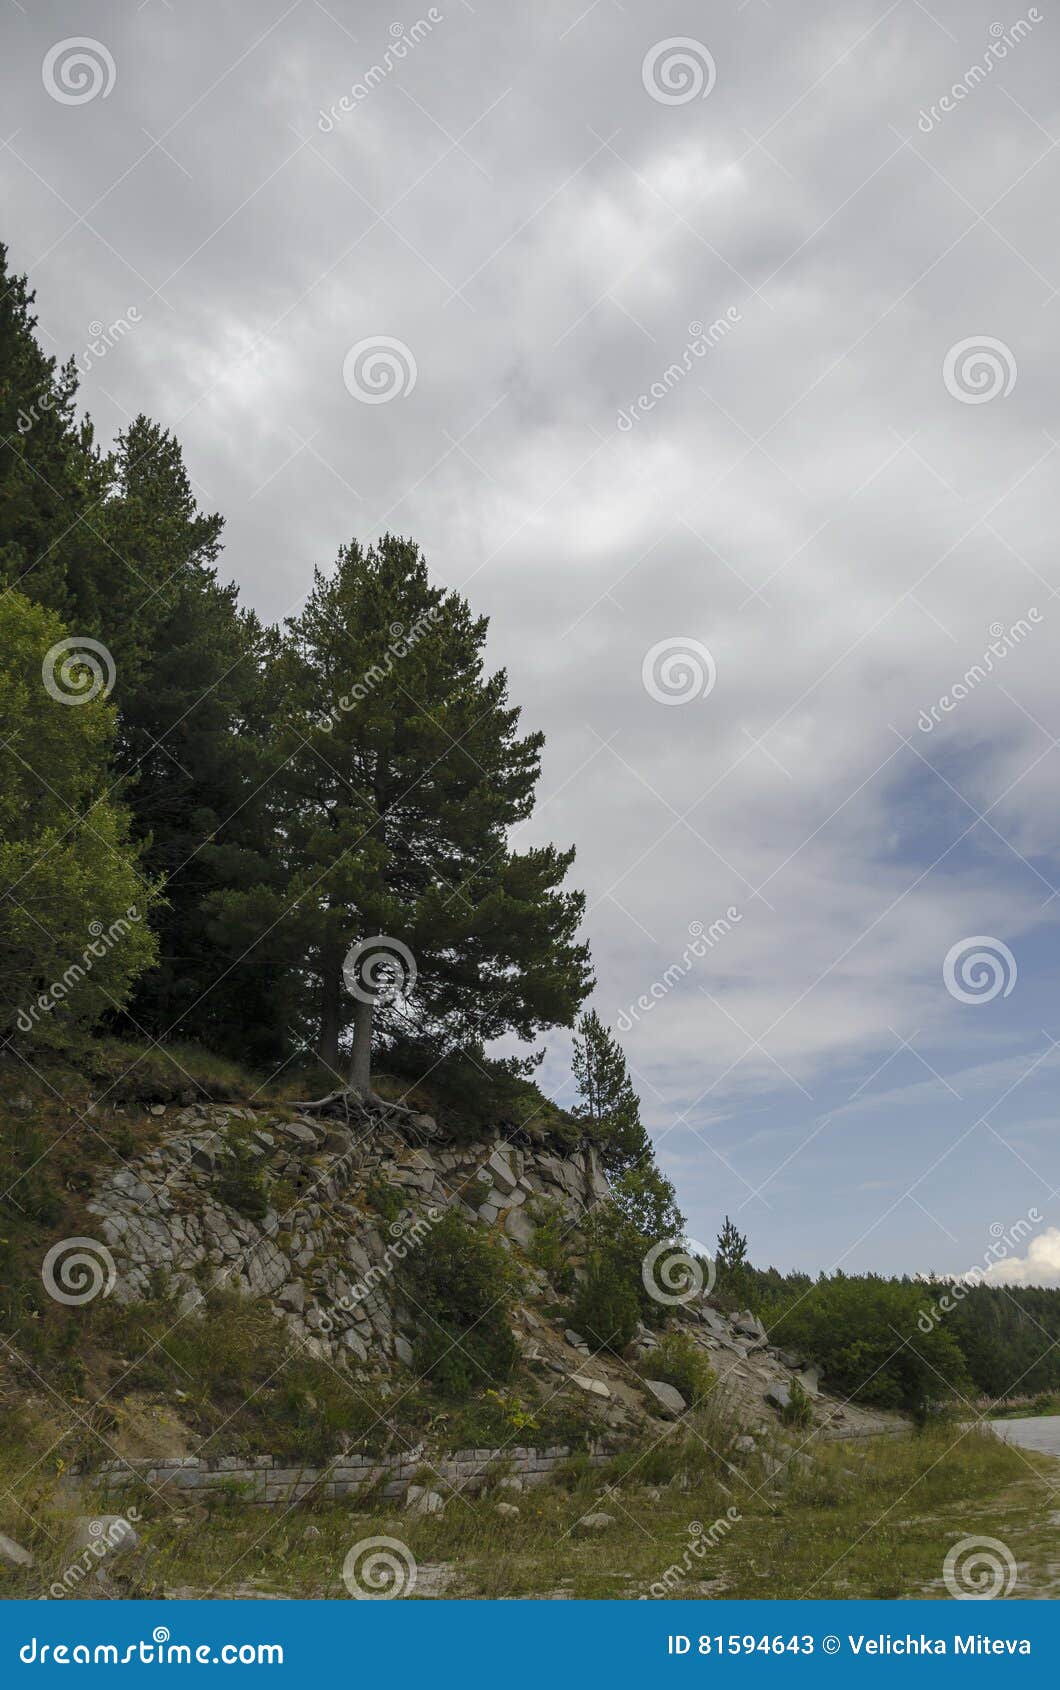 green forest on rocky hill and road near by hija or rest-house aleko